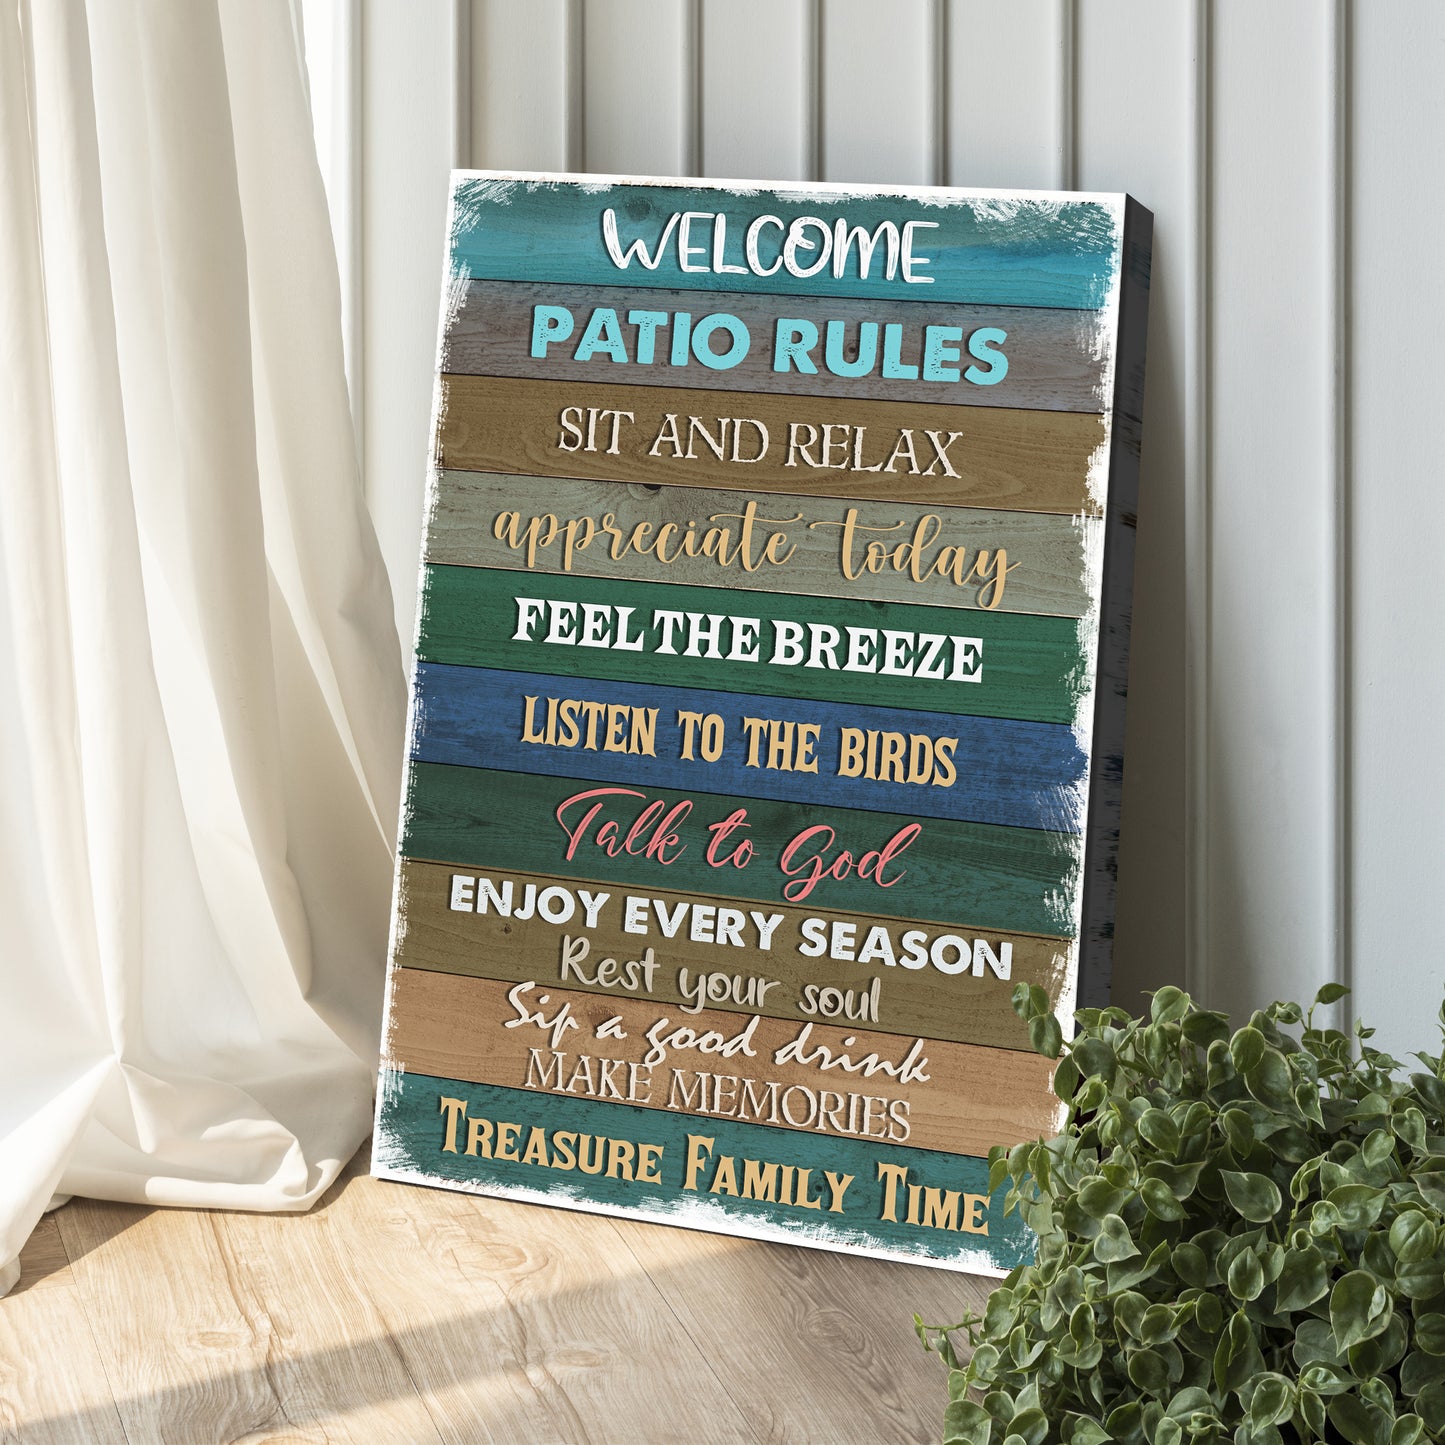 Patio Rules Sign Style 1 - Image by Tailored Canvases